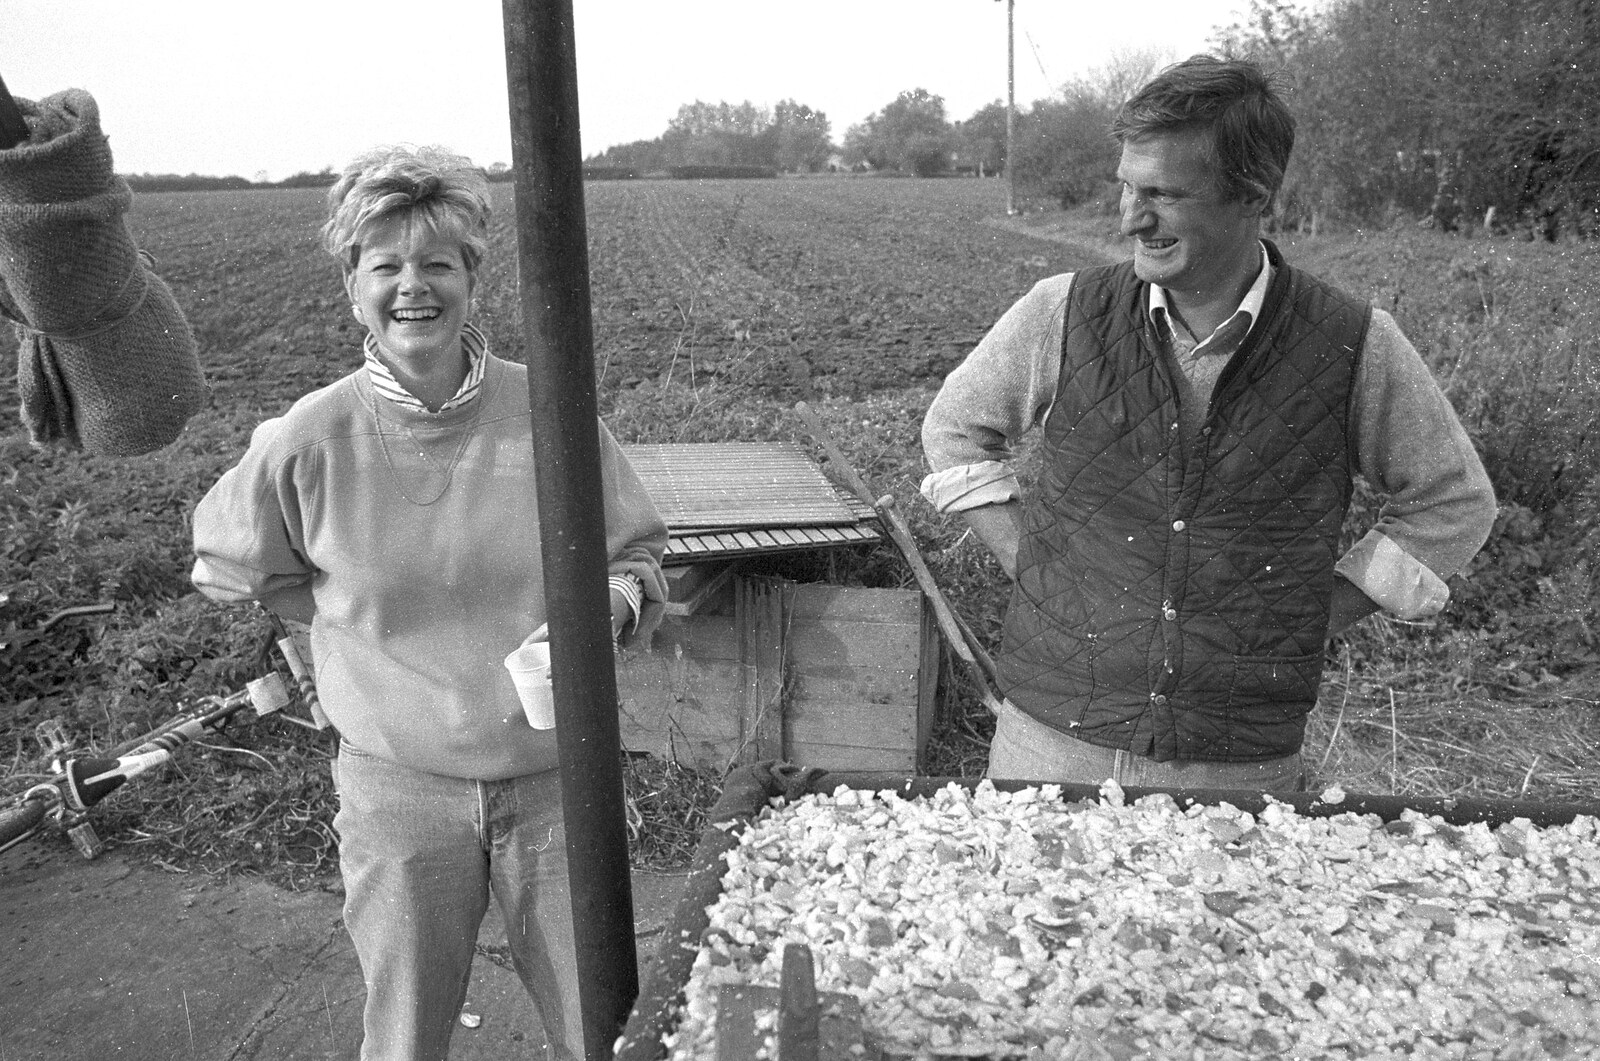 Sheila and Geoff from Cider Making in Black and White, Stuston, Suffolk - 11th October 1992